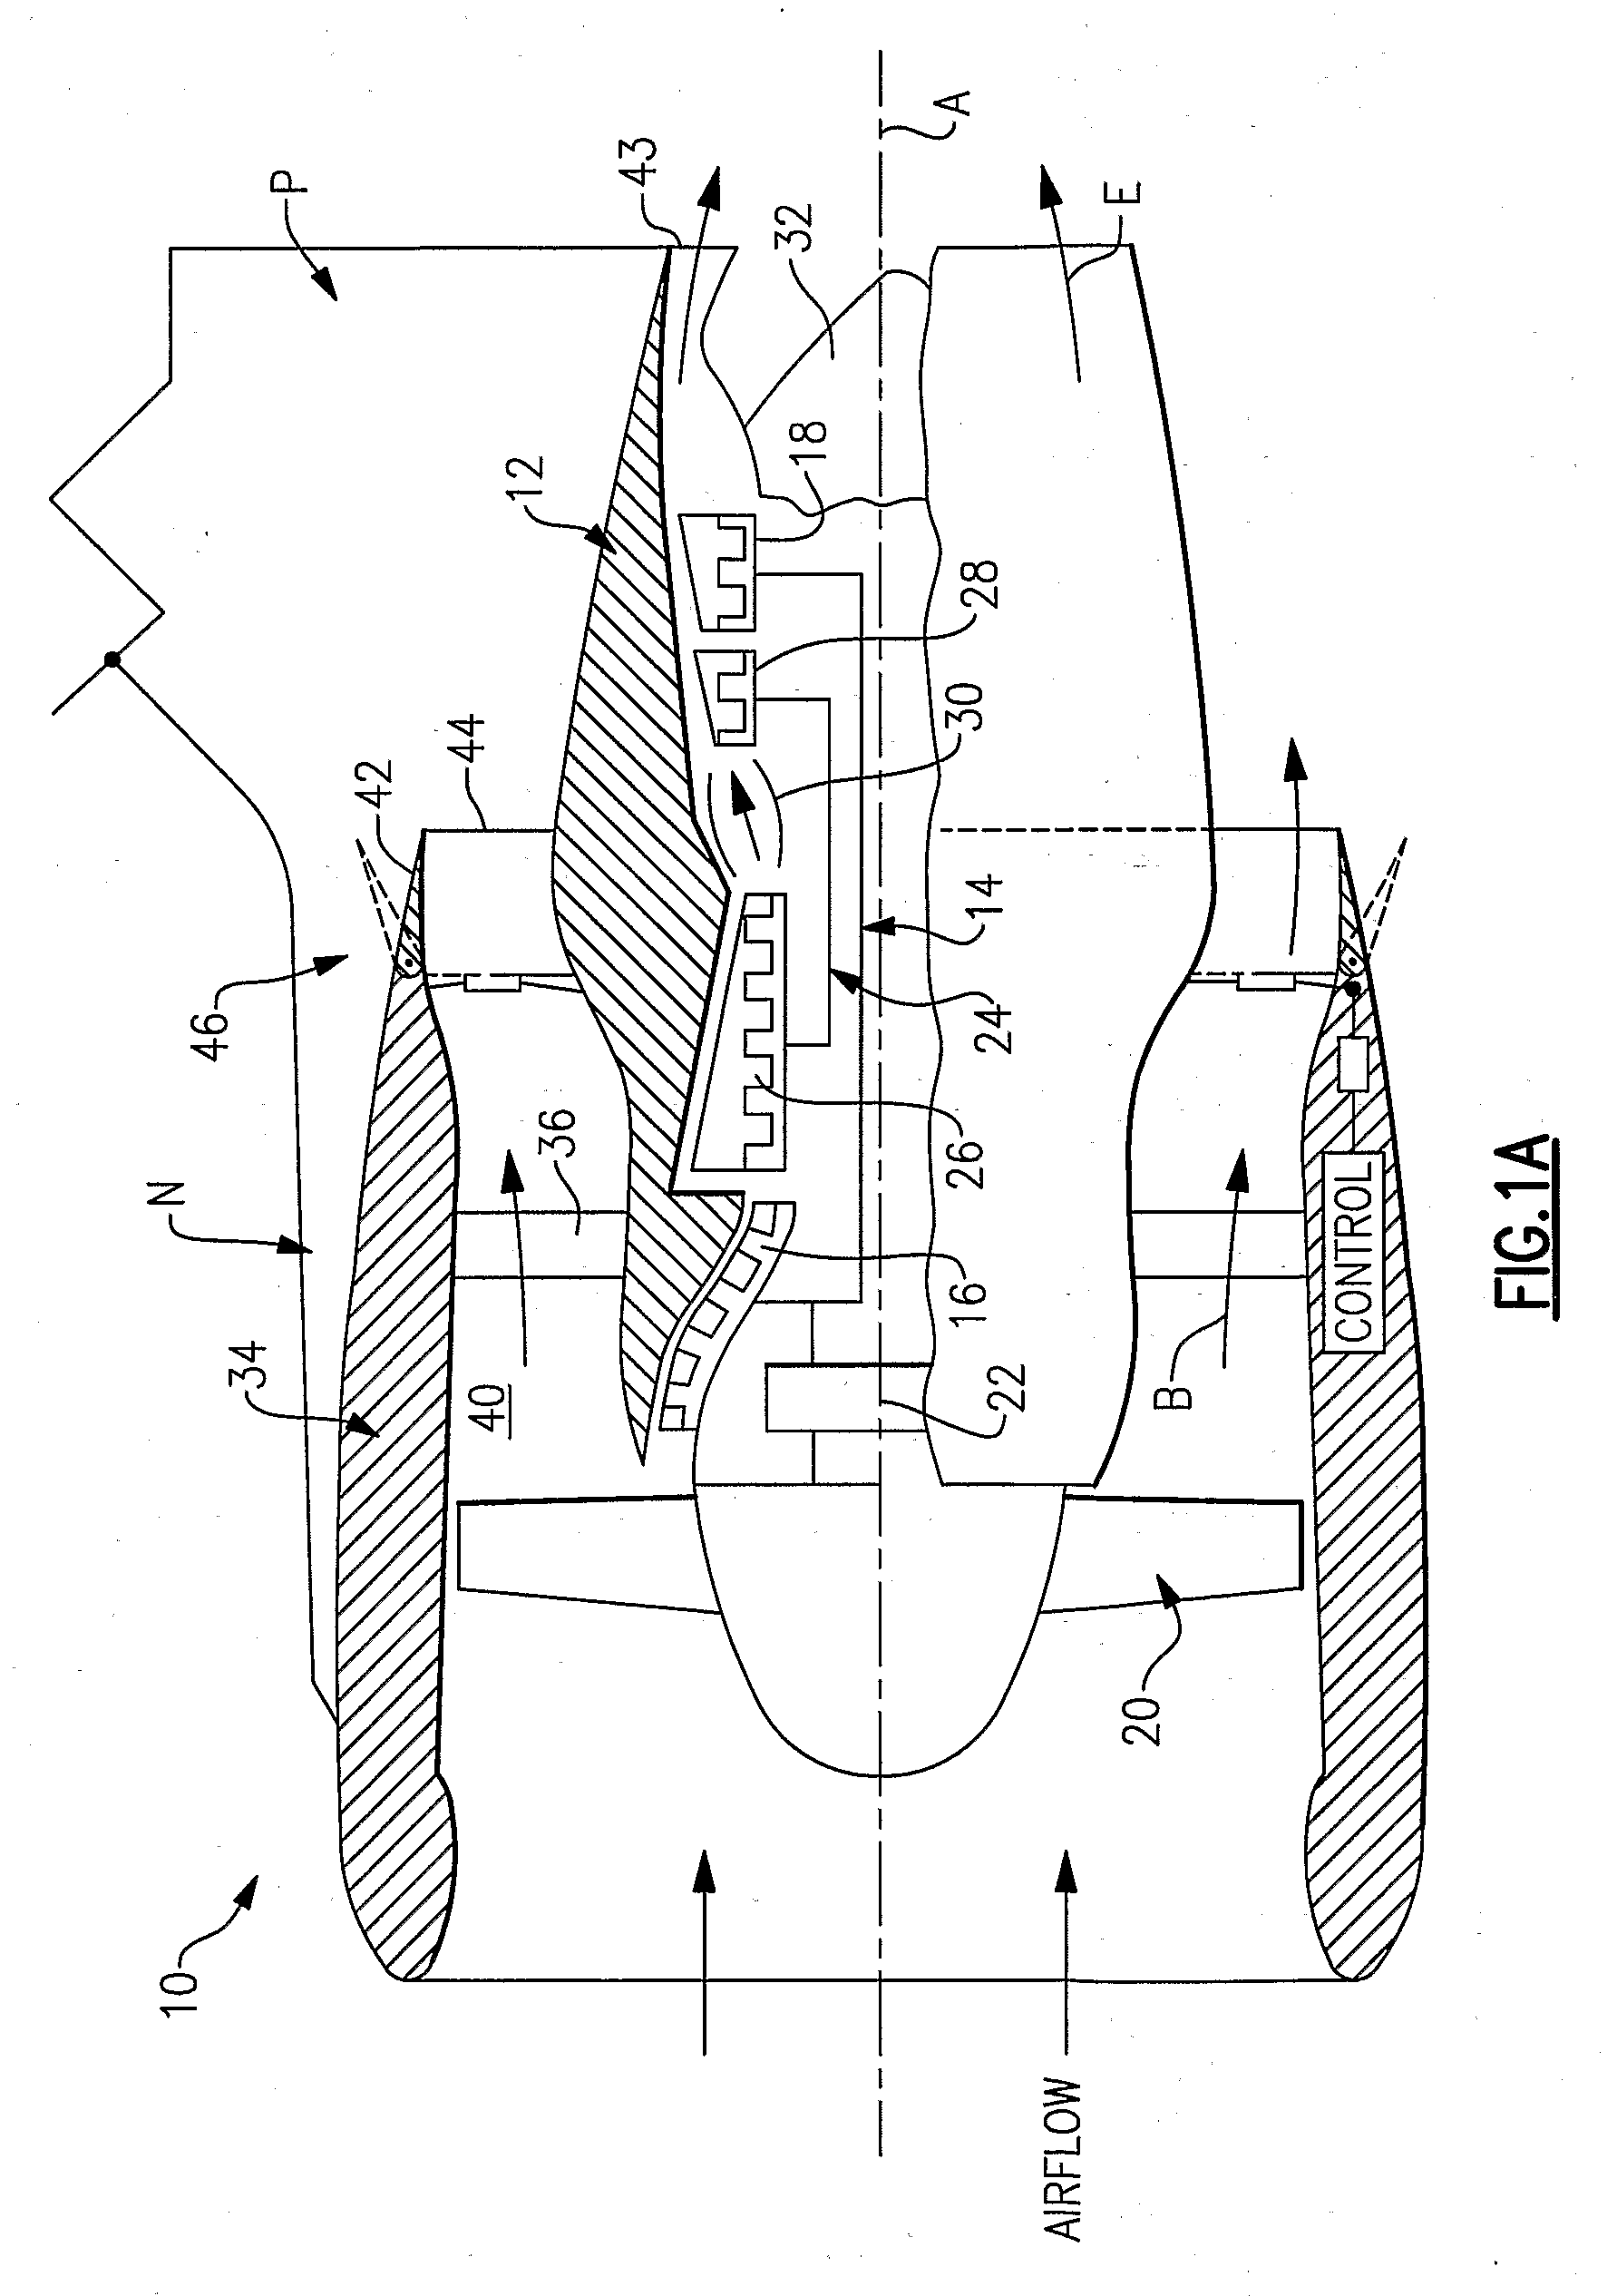 Fan variable area nozzle with cable actuator system